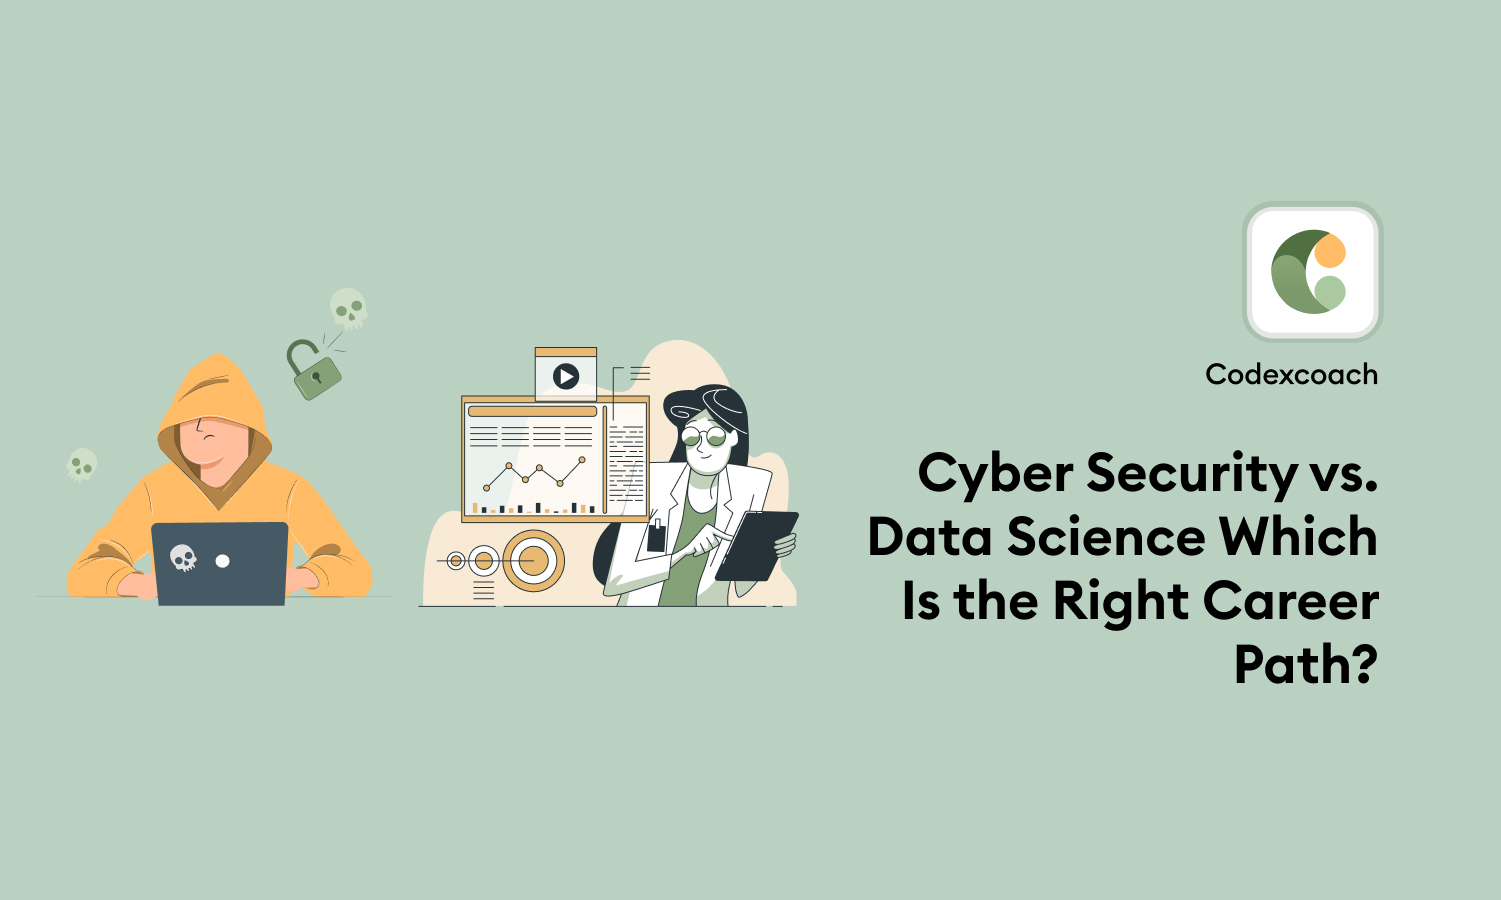 Cyber Security vs Data Science Which Is the Right Career Path